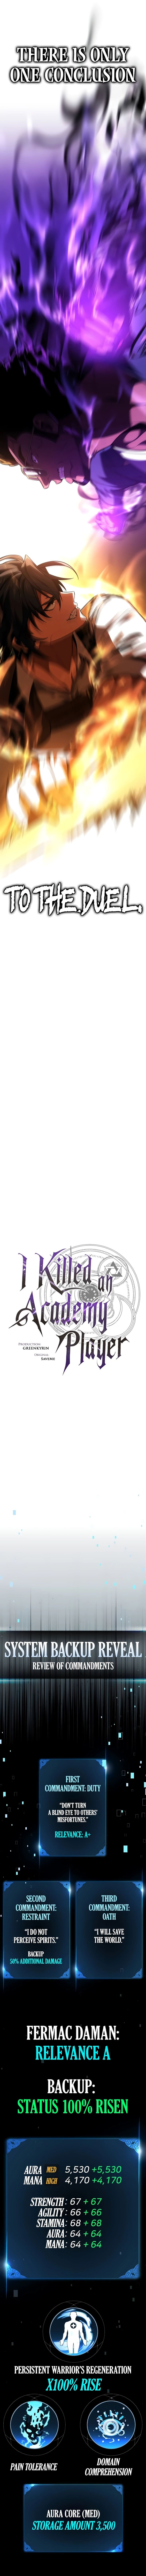 i-killed-an-academy-player-chap-31-2